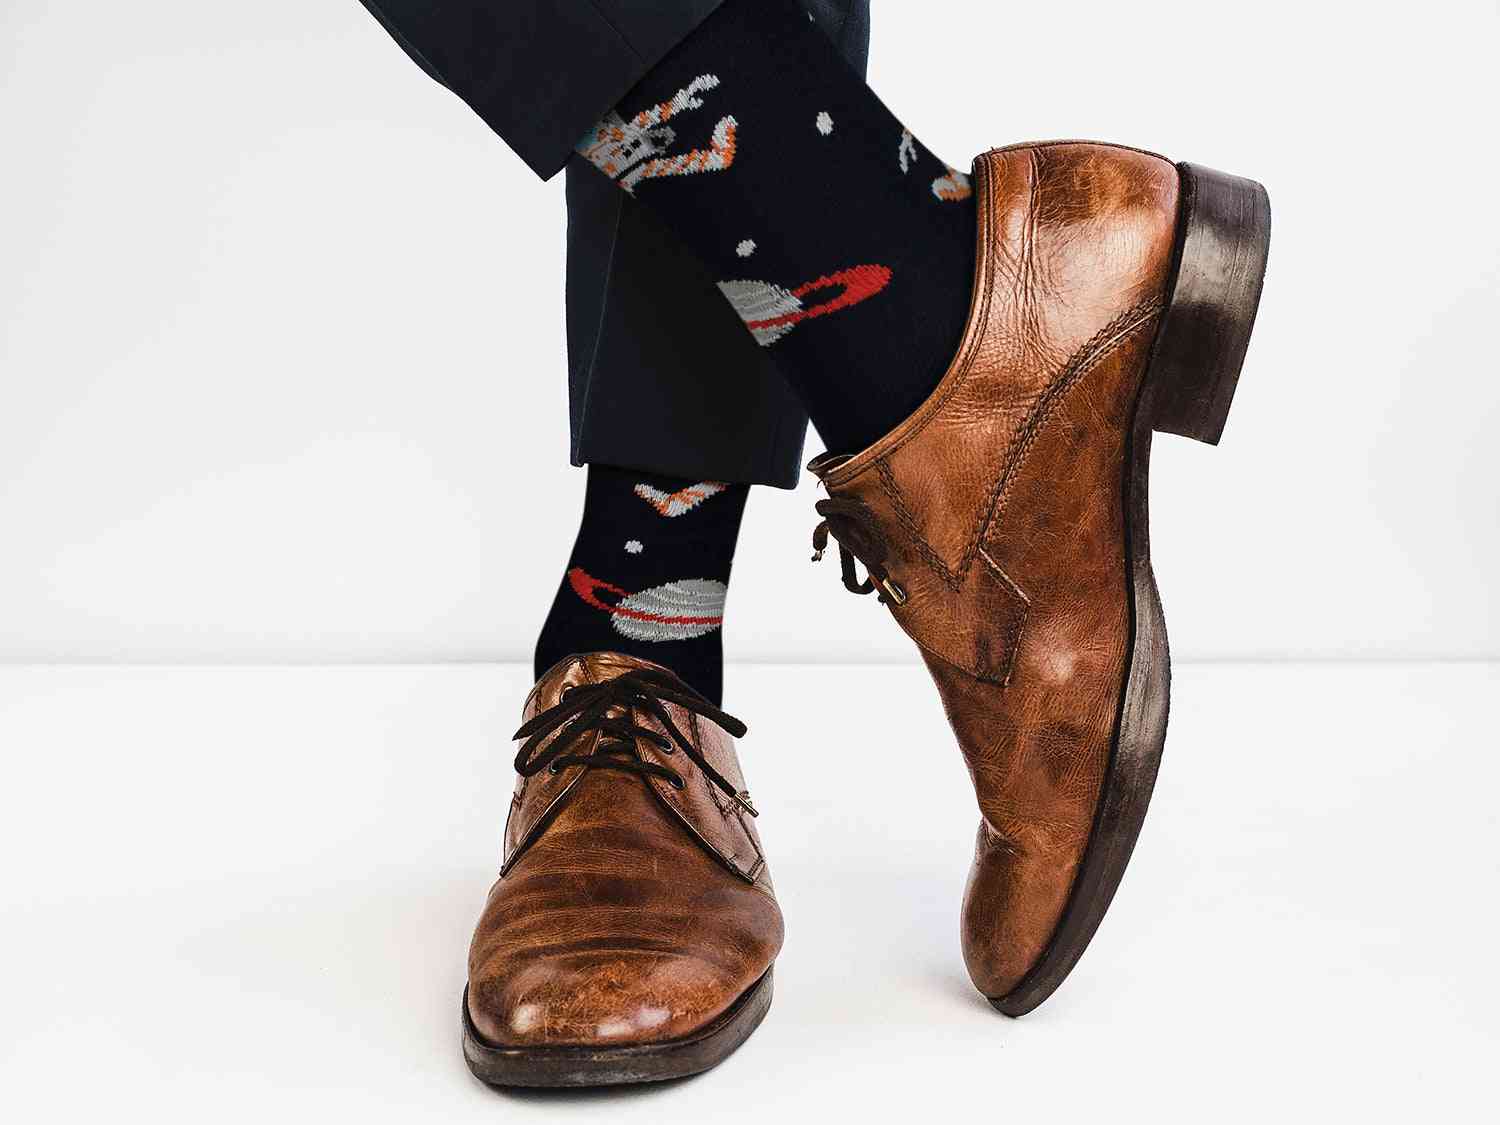 Space / Astronaut – Off The Wall Casual Dress Socks